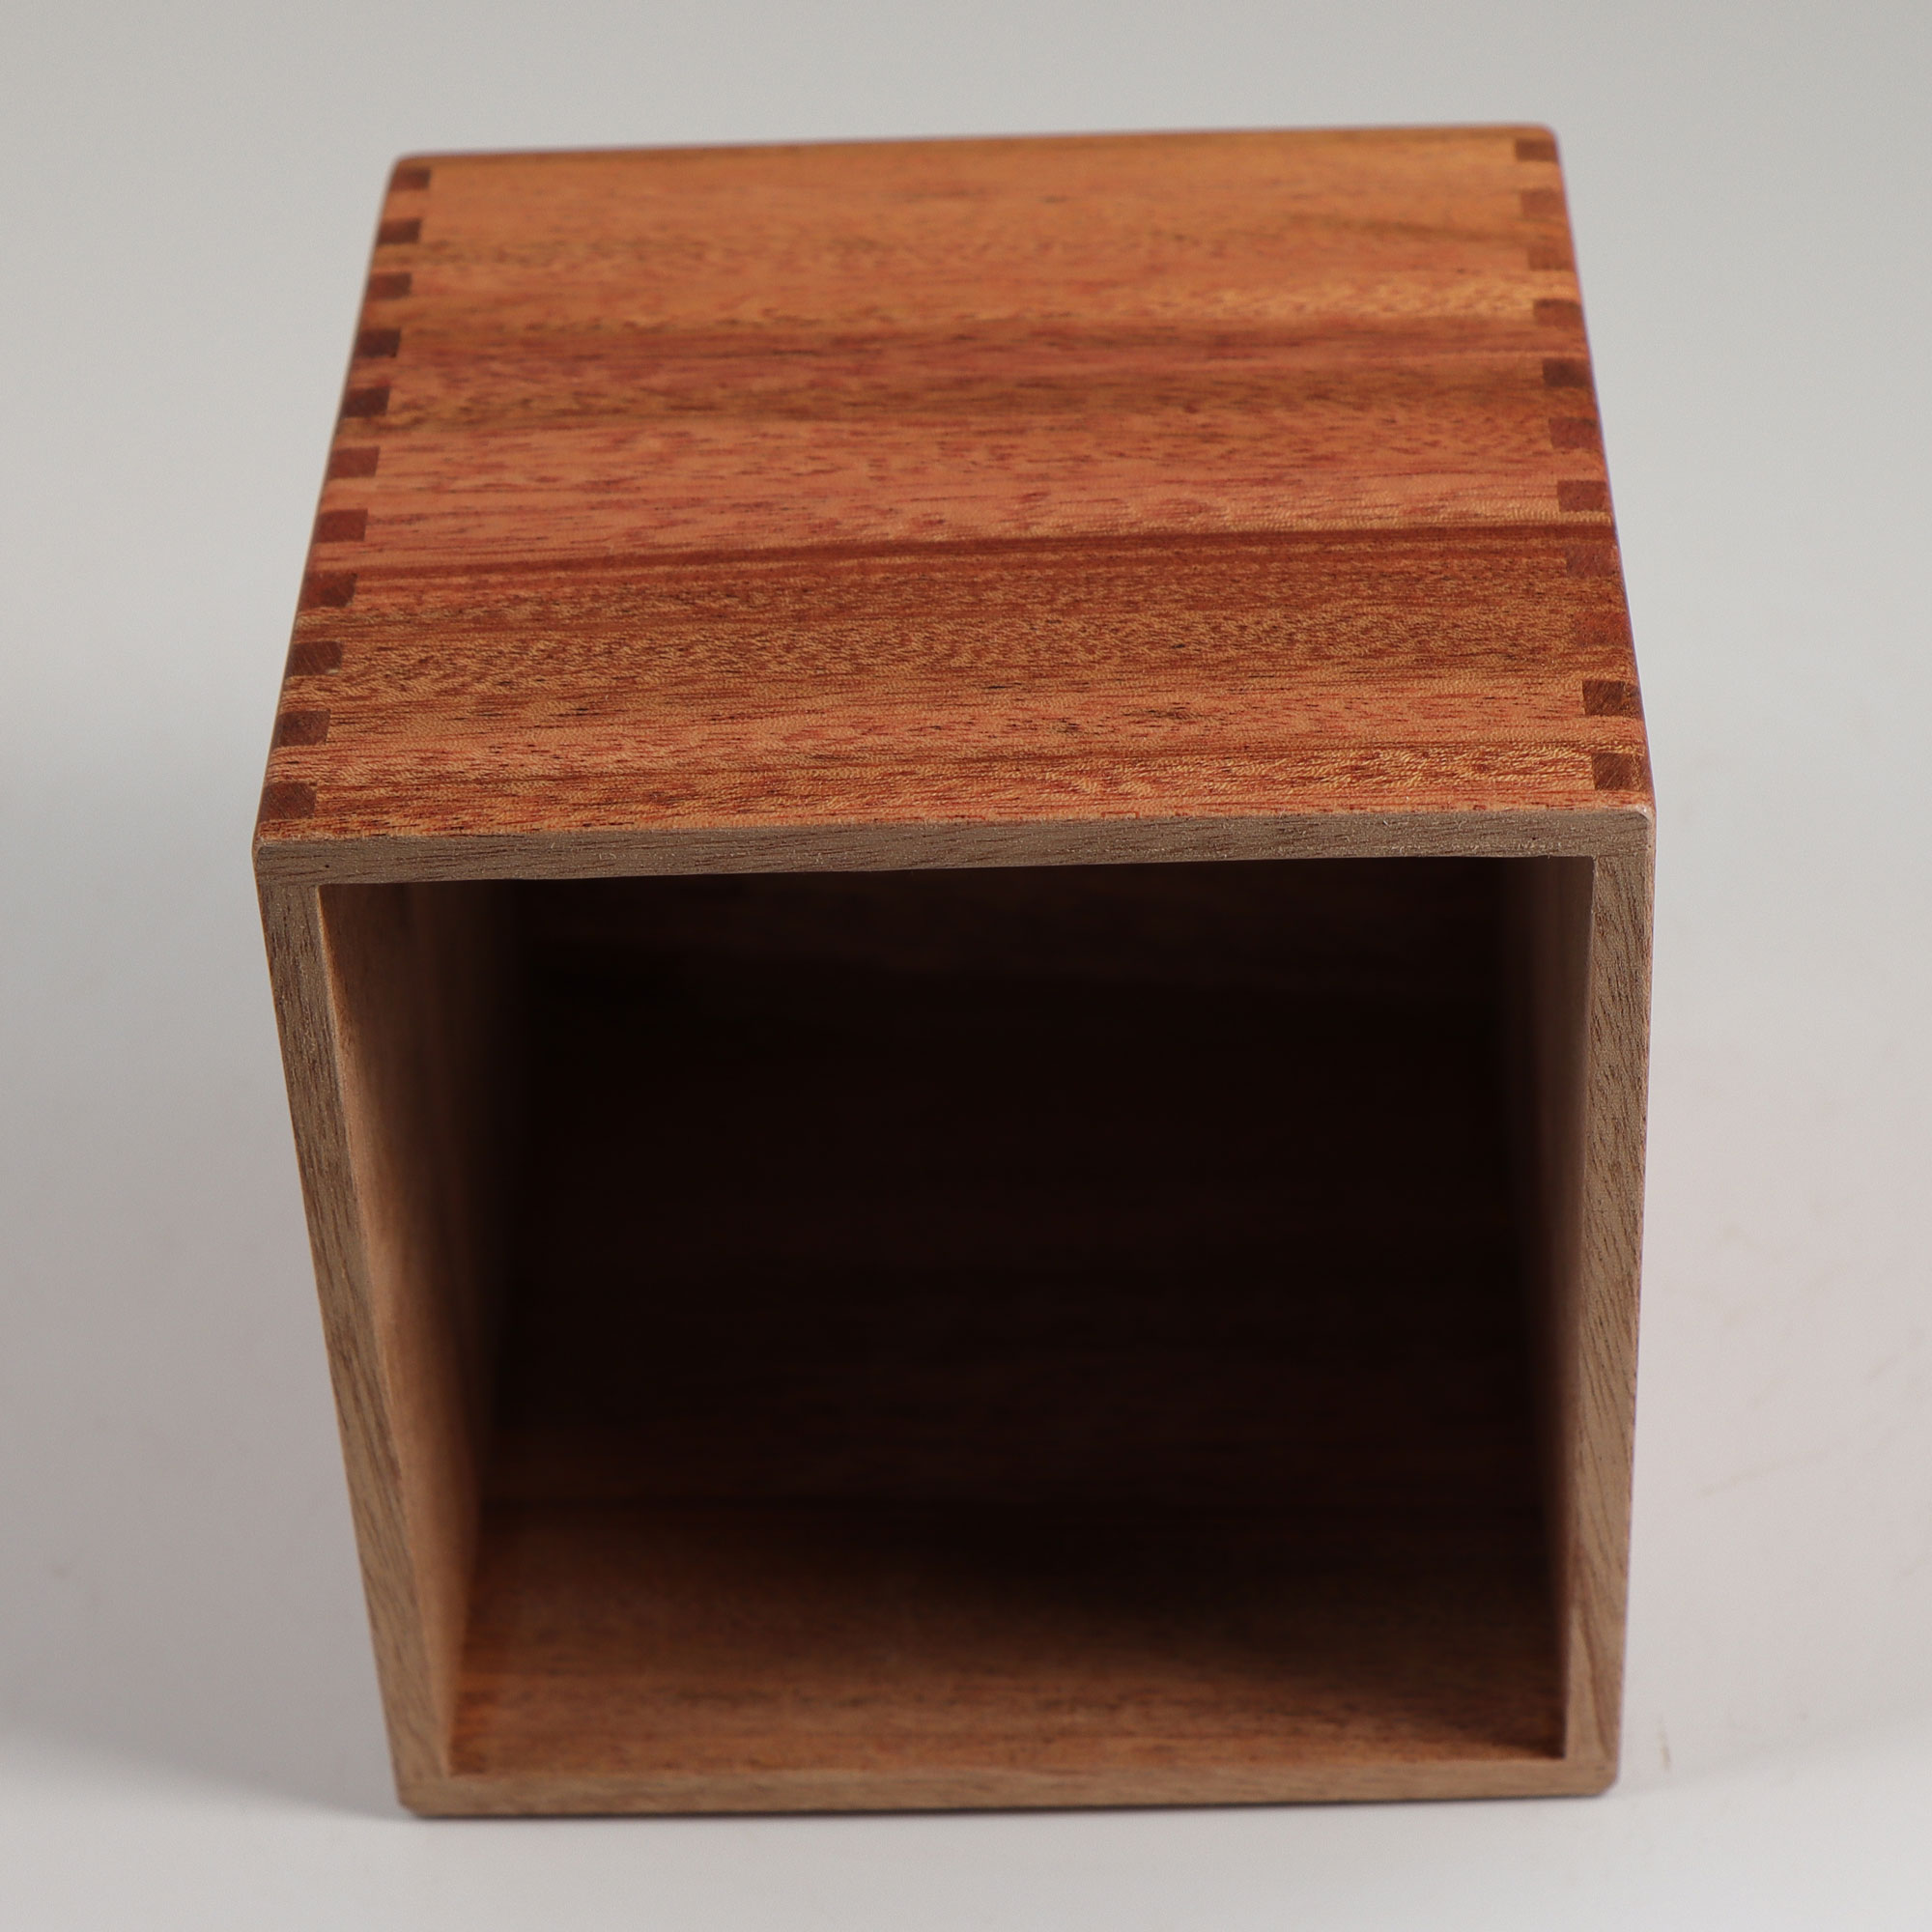 Hand Crafted Small Mahogany Wooden Box # 1 by Wooden-It-Be-Nice